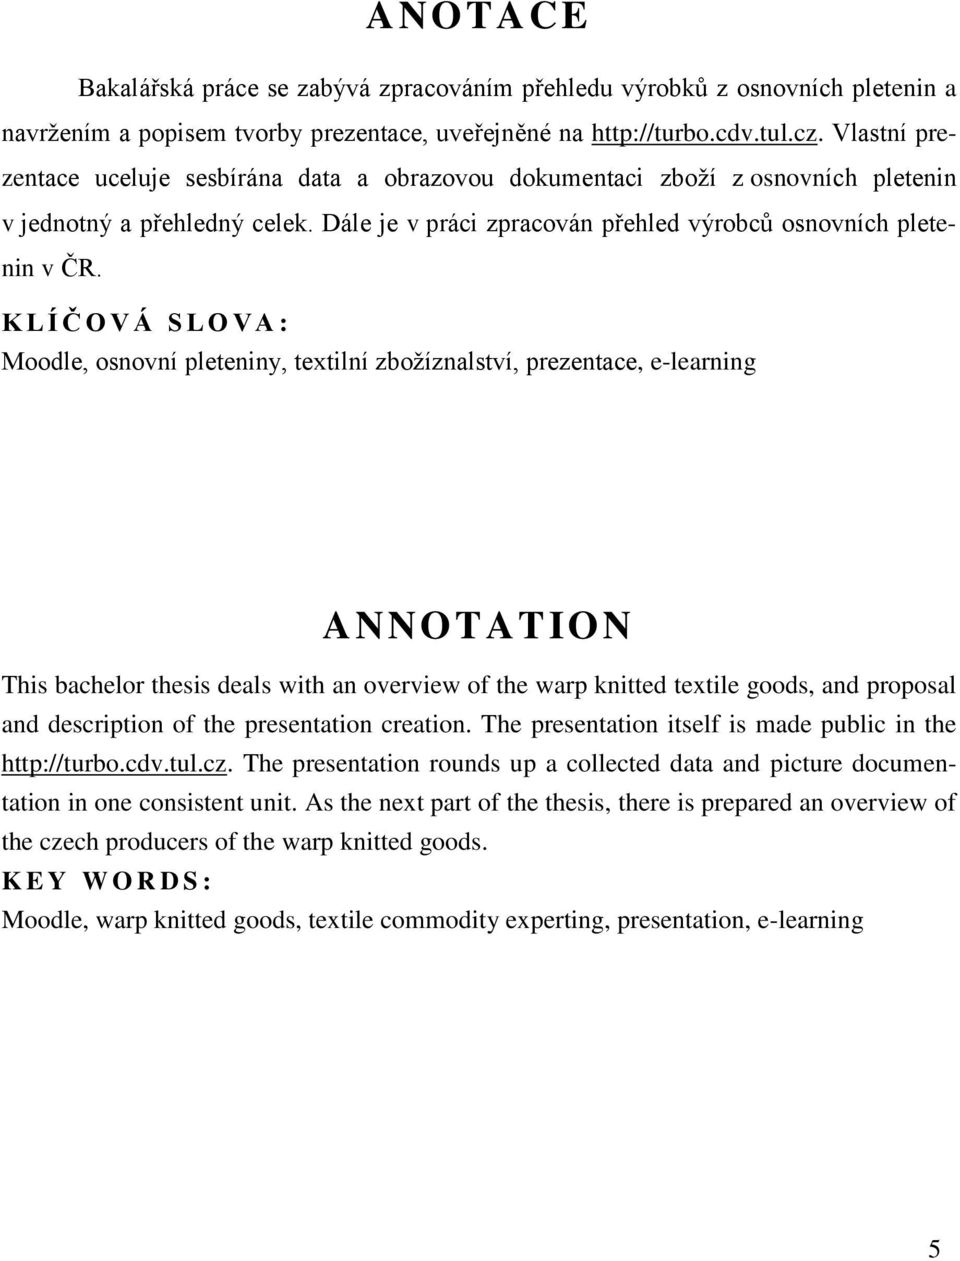 K L Í Č O V Á S L O V A : Moodle, osnovní pleteniny, textilní zbožíznalství, prezentace, e-learning ANNOTATION This bachelor thesis deals with an overview of the warp knitted textile goods, and